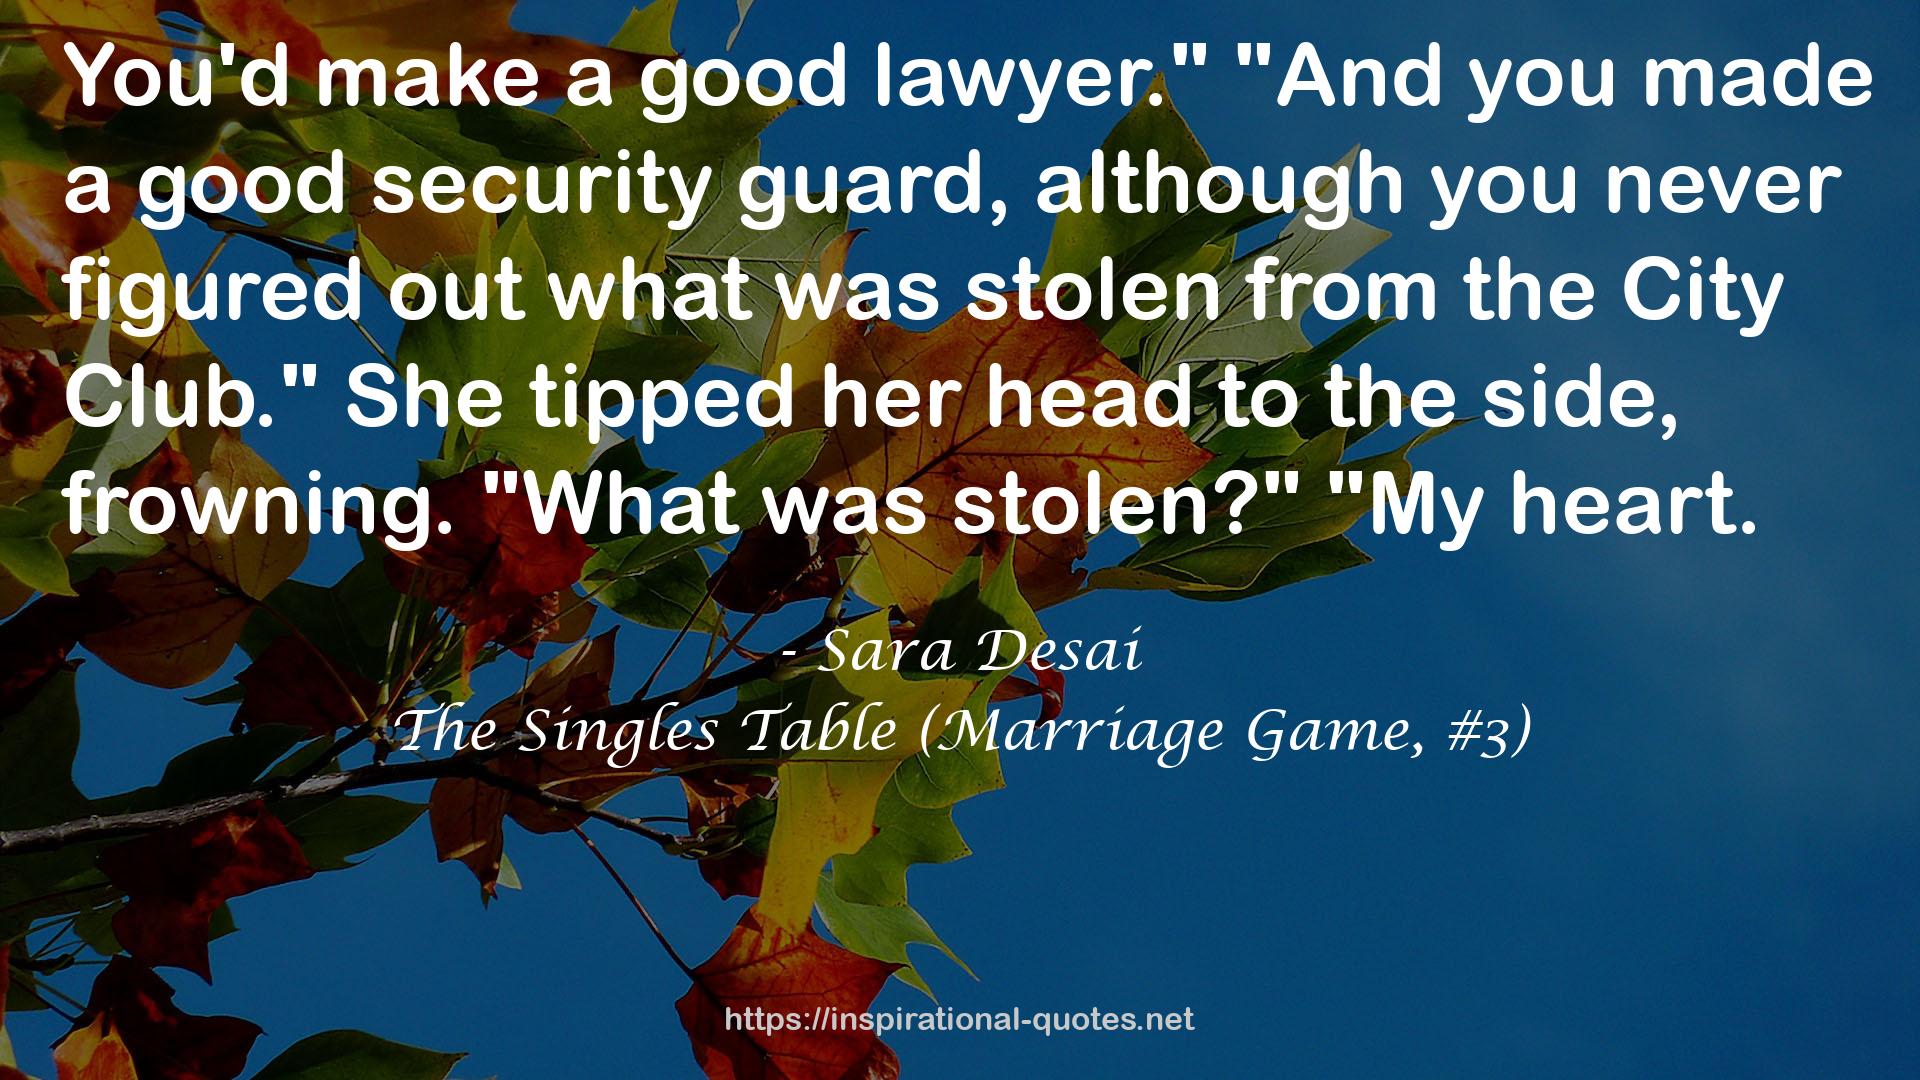 The Singles Table (Marriage Game, #3) QUOTES